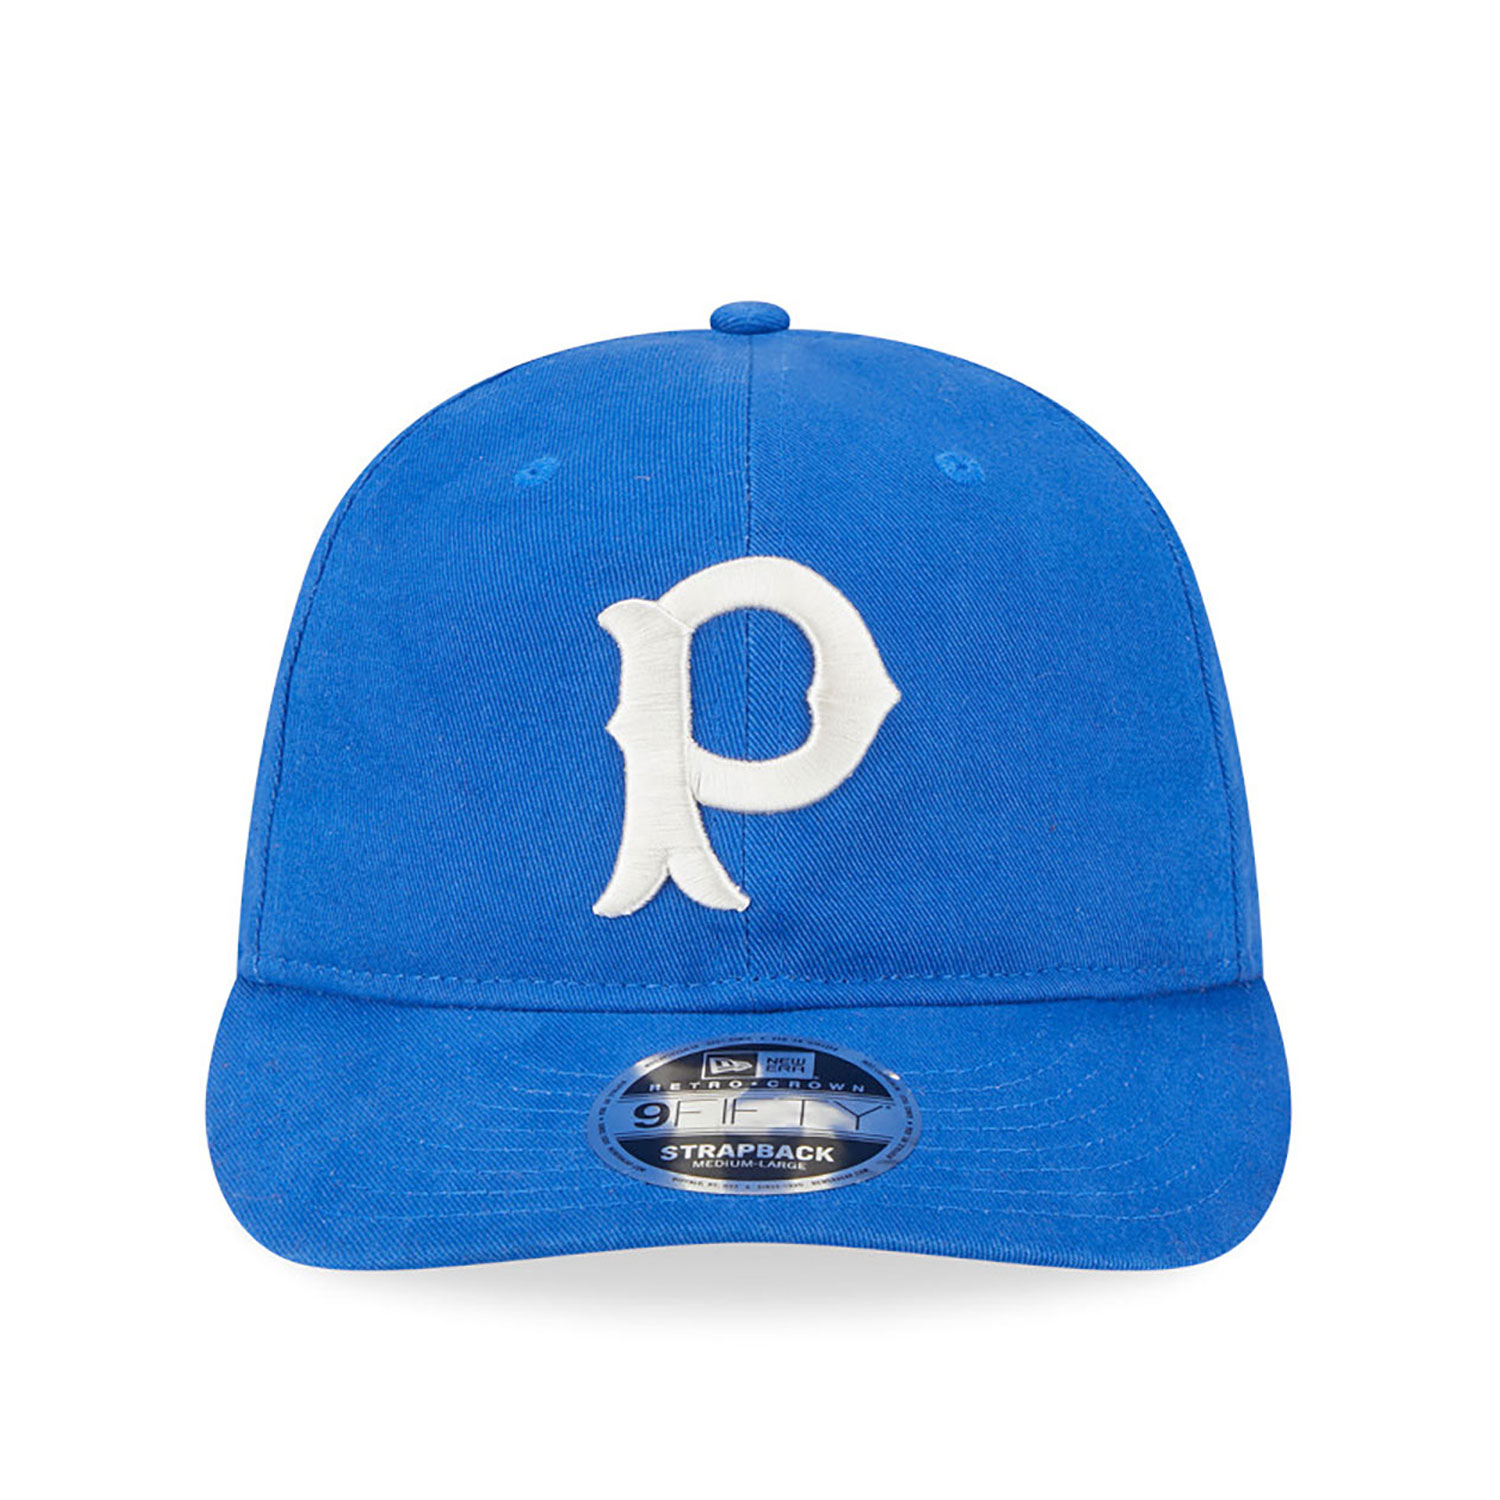 Pittsburgh Pirates MLB Cooperstown Blue Retro Crown 9FIFTY Strapback Cap